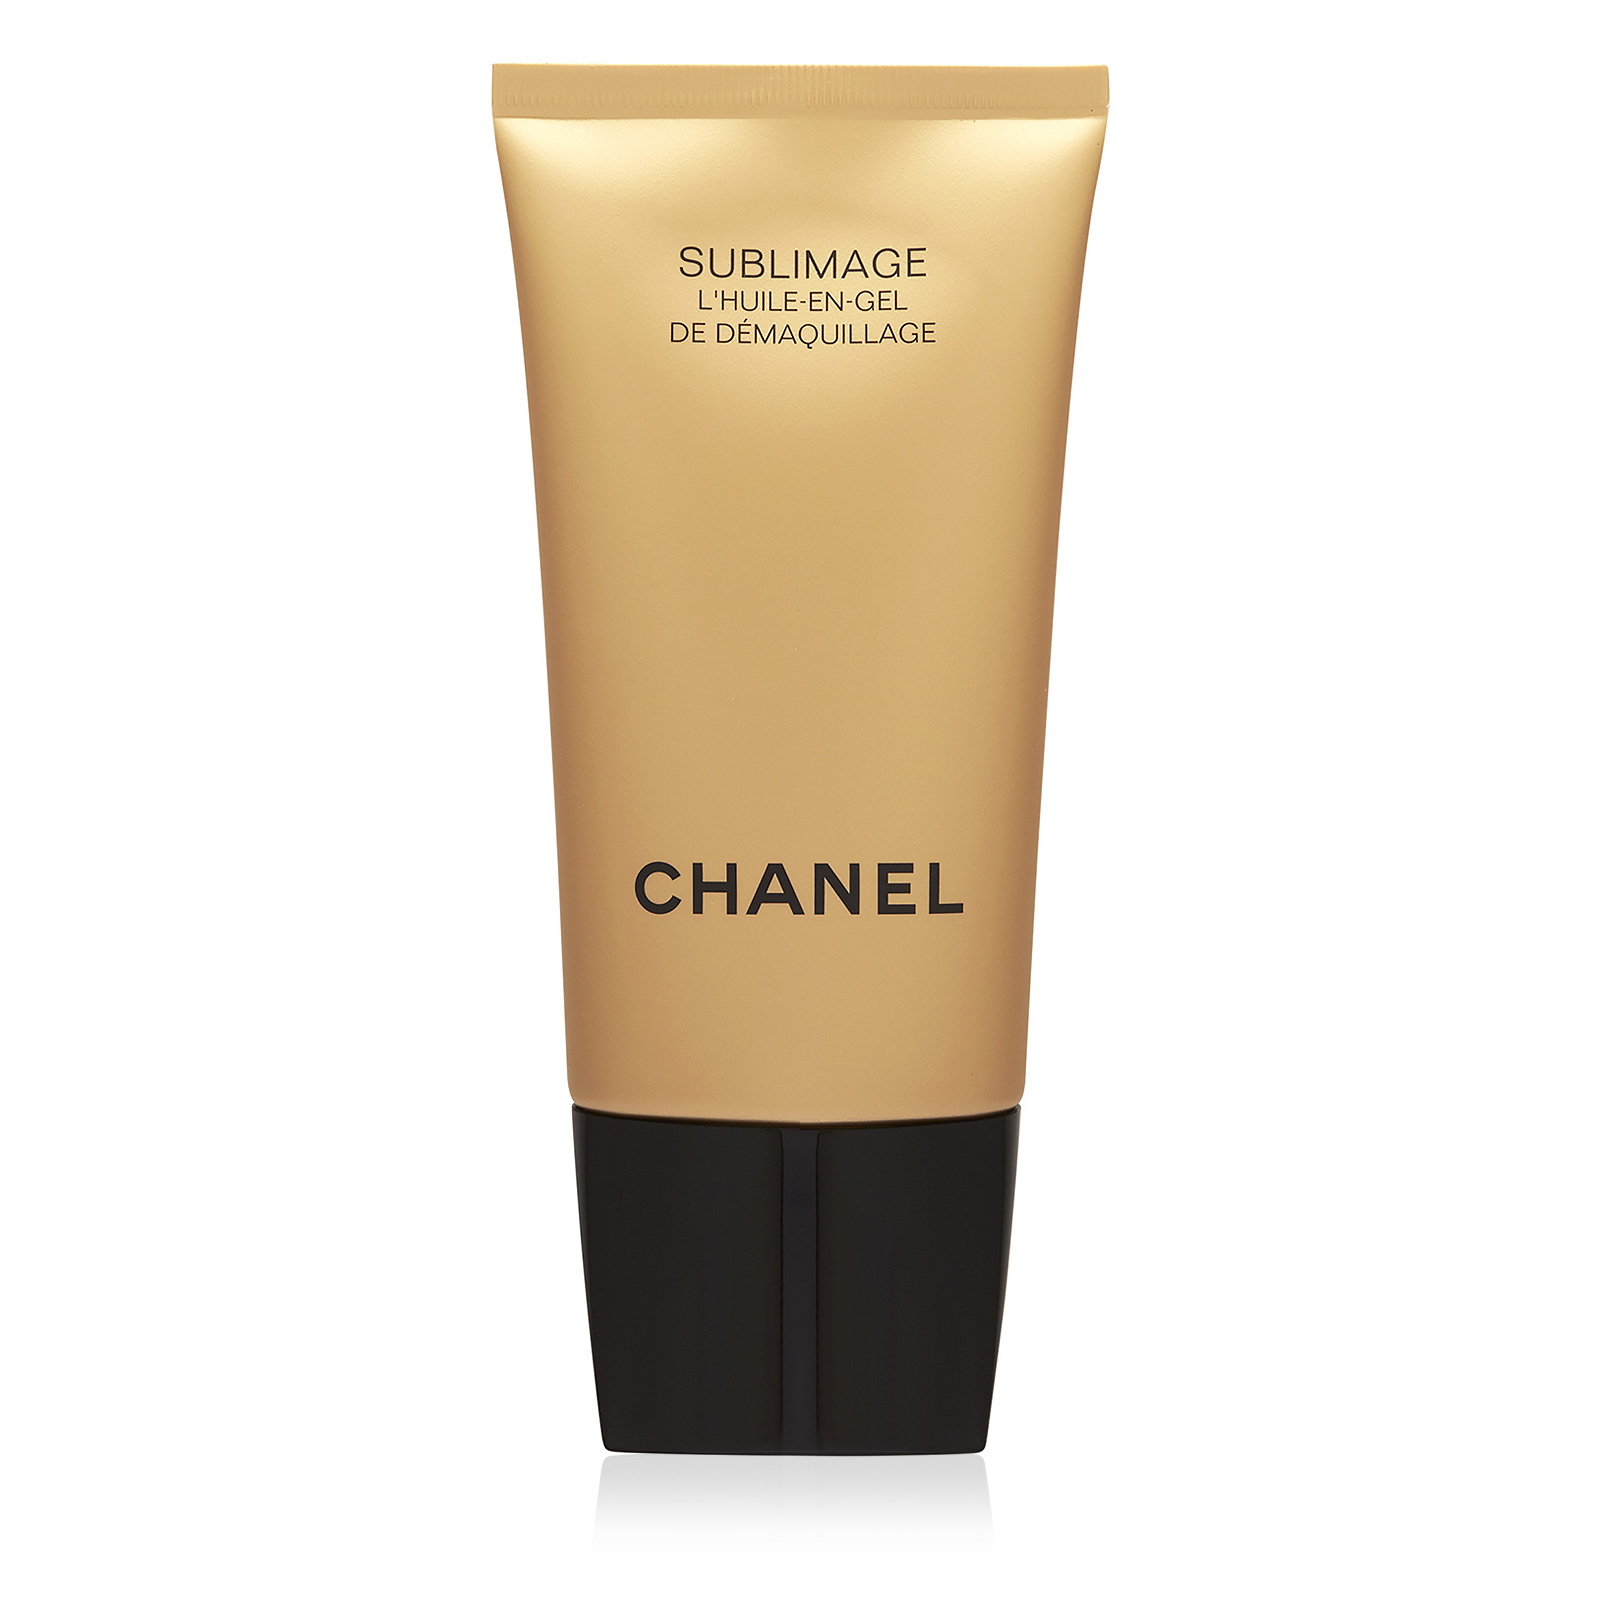 Chanel L'Huile Anti-Pollution Cleansing Oil and Le Lait Anti-Pollution  Cleansing Milk-to-Oil + Review